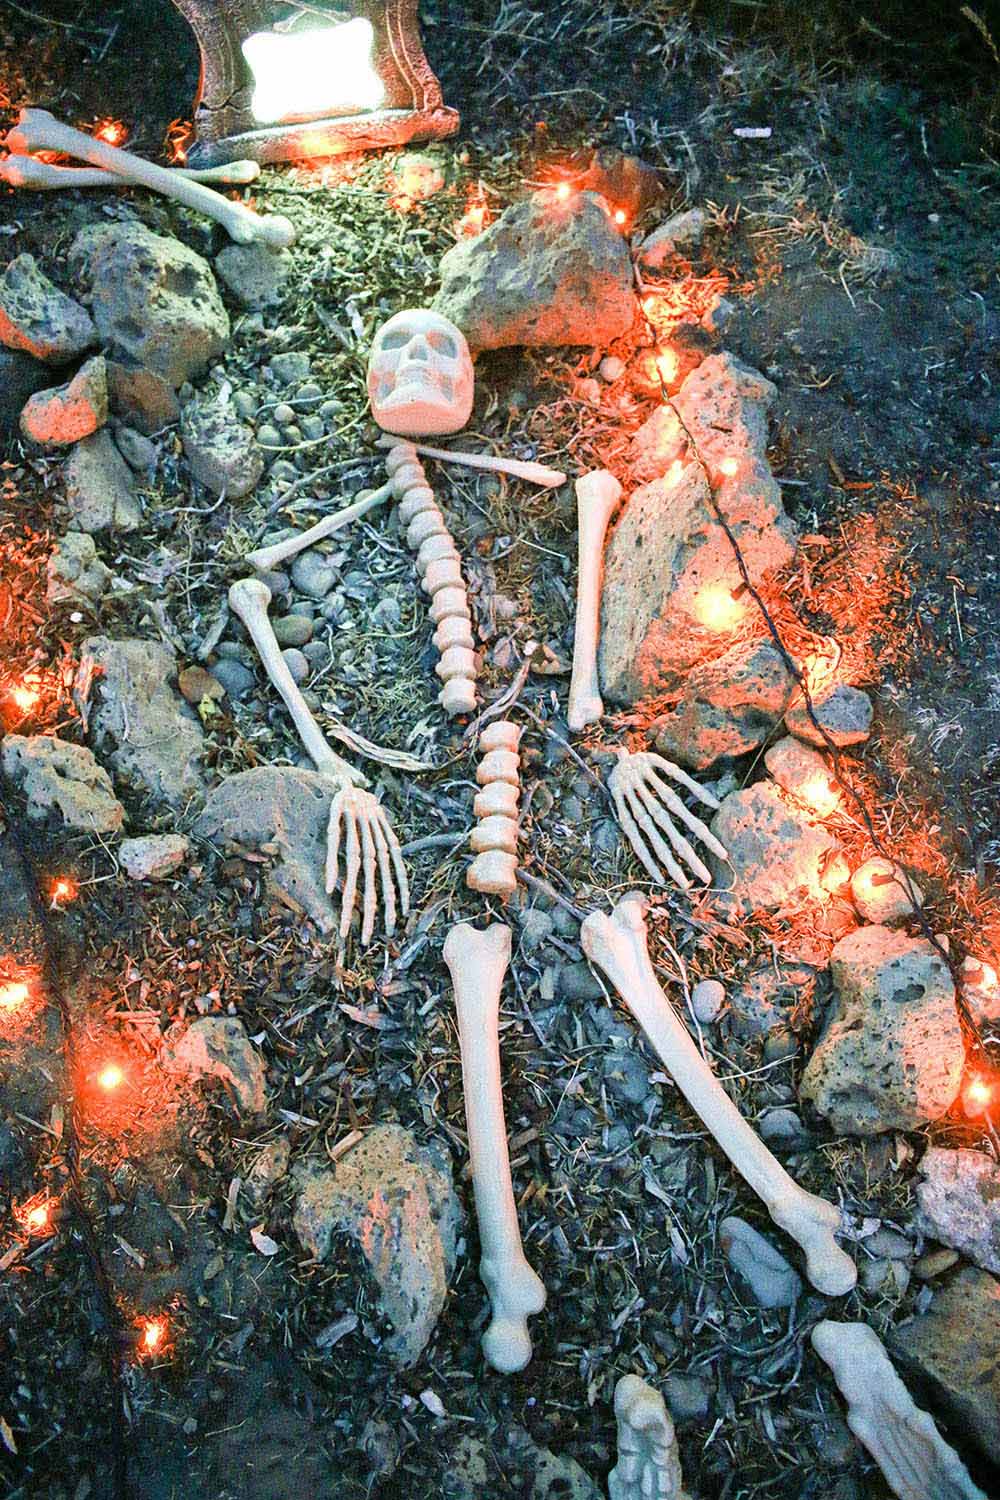 A grave with skeleton bones surrounded by orange lights.